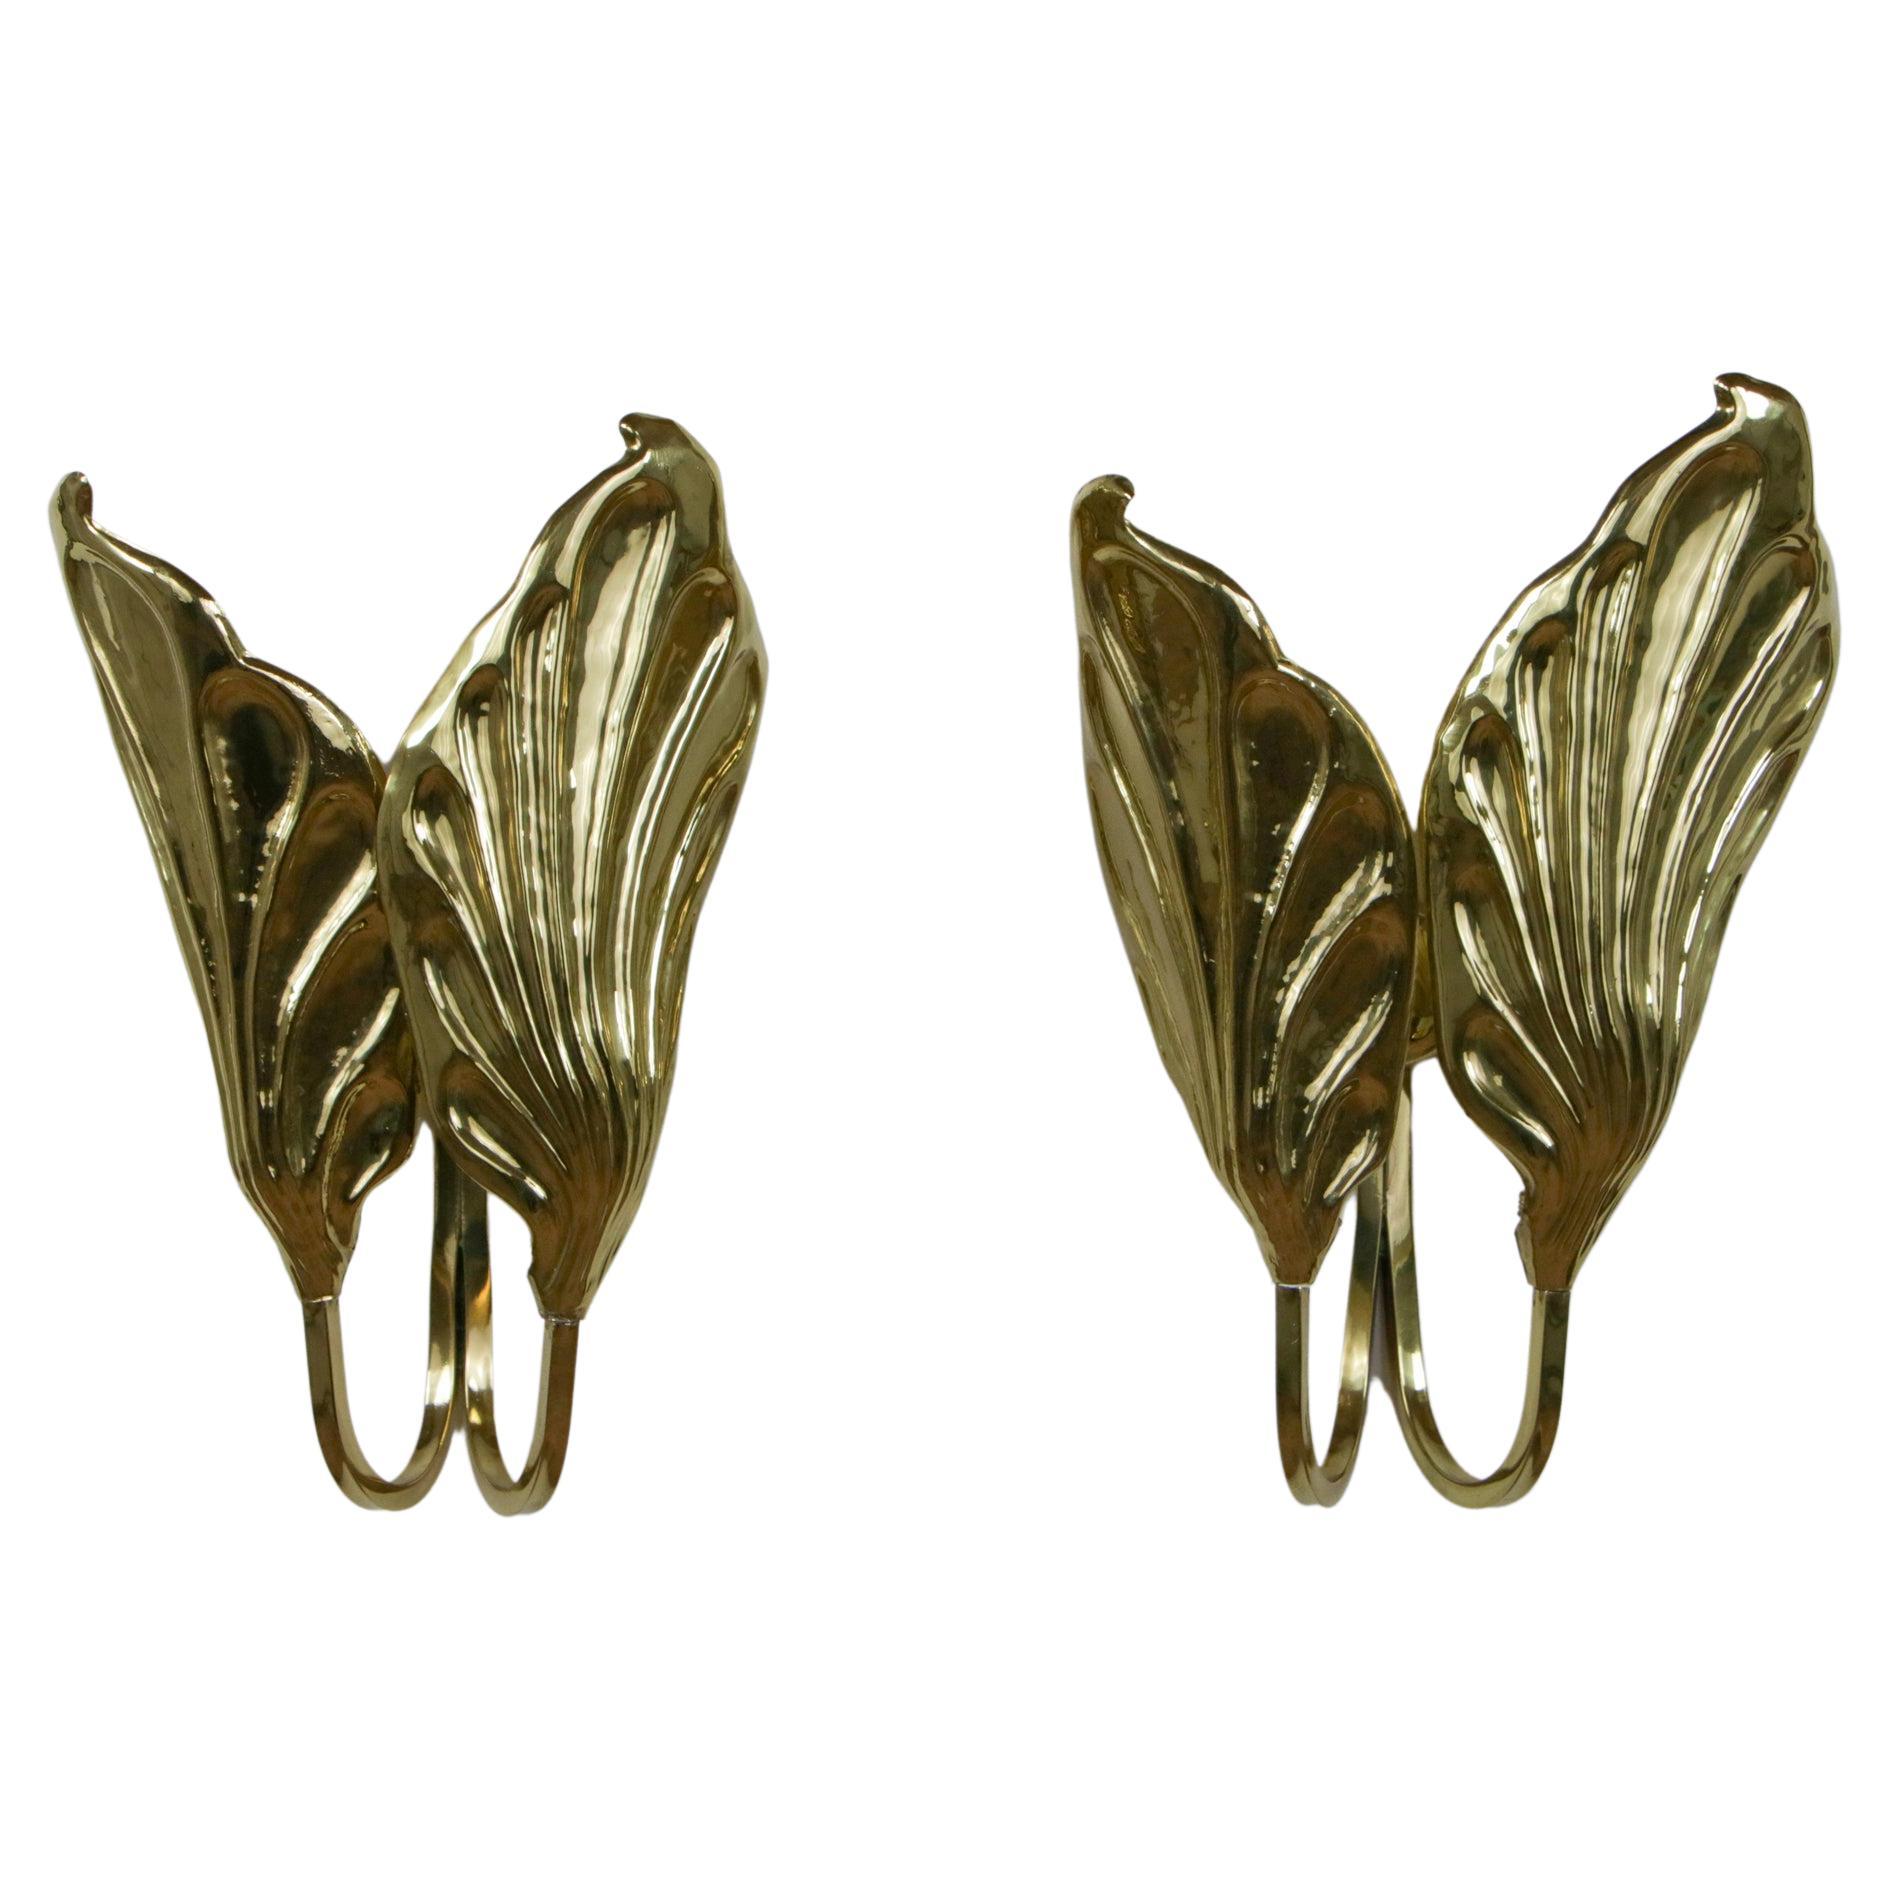 These spectacular pair of appliques were designed by Tommaso Barbi in the 60s for G&G Studio and Design. They are made of embossed, chiseled, polished, and transparently varnished brass. Highly decorative and visually impactful, this set has the